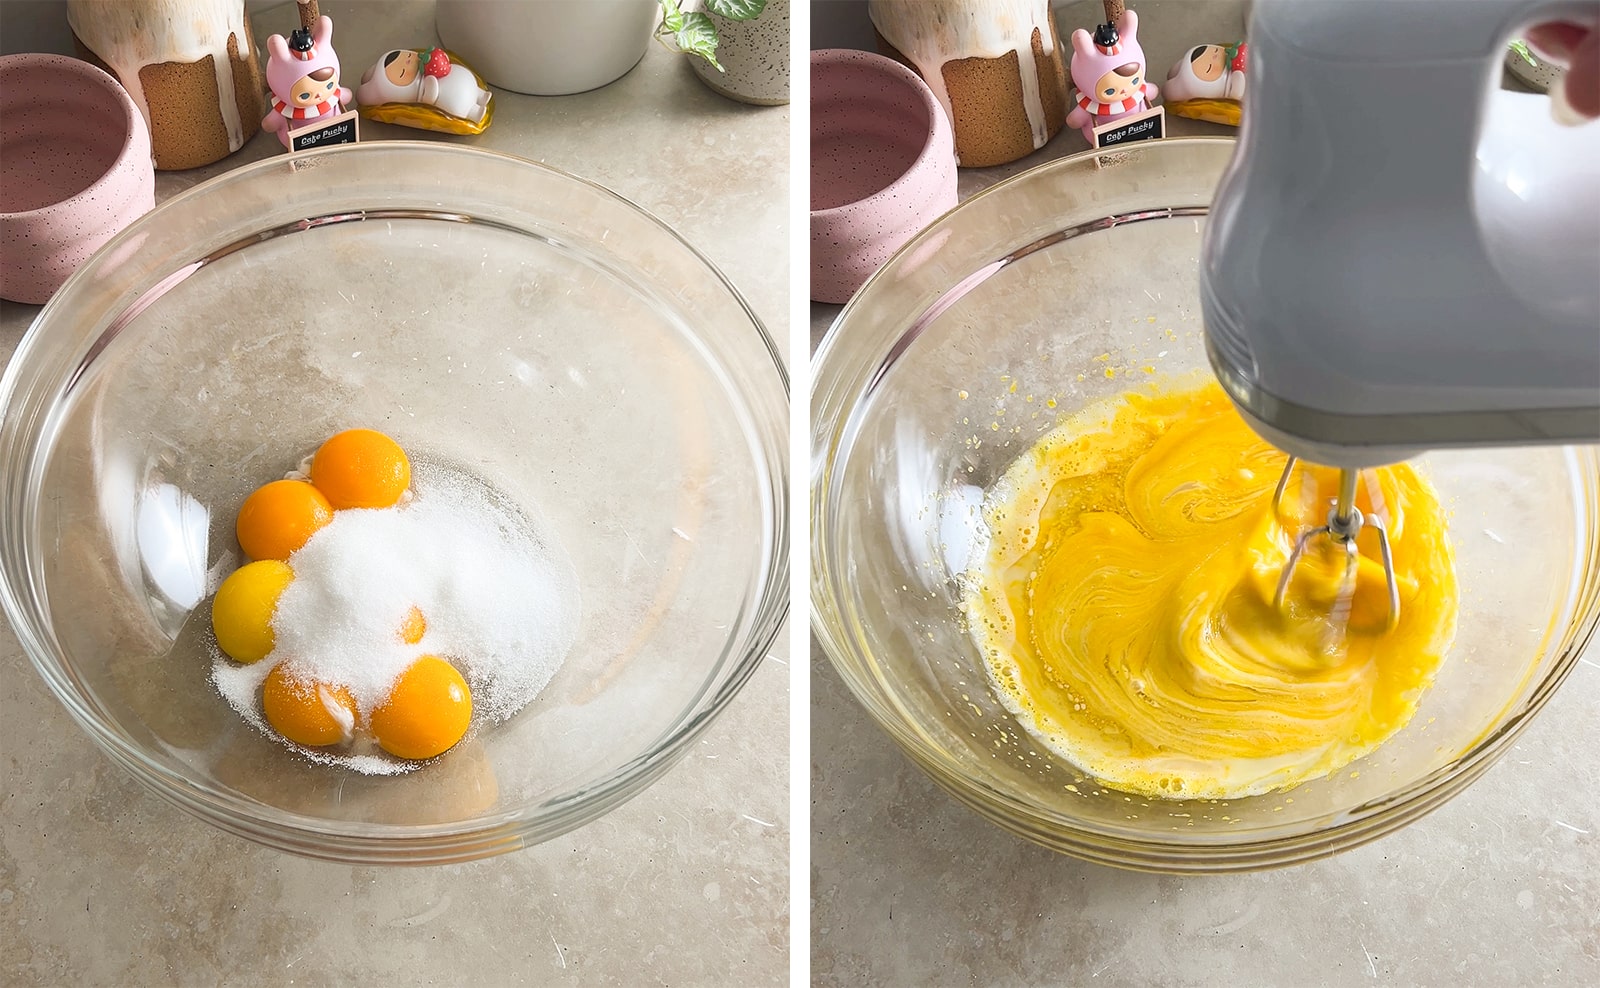 Left to right: egg yolks and sugar in a mixing bowl, mixing egg yolk mixture with a hand mixer.